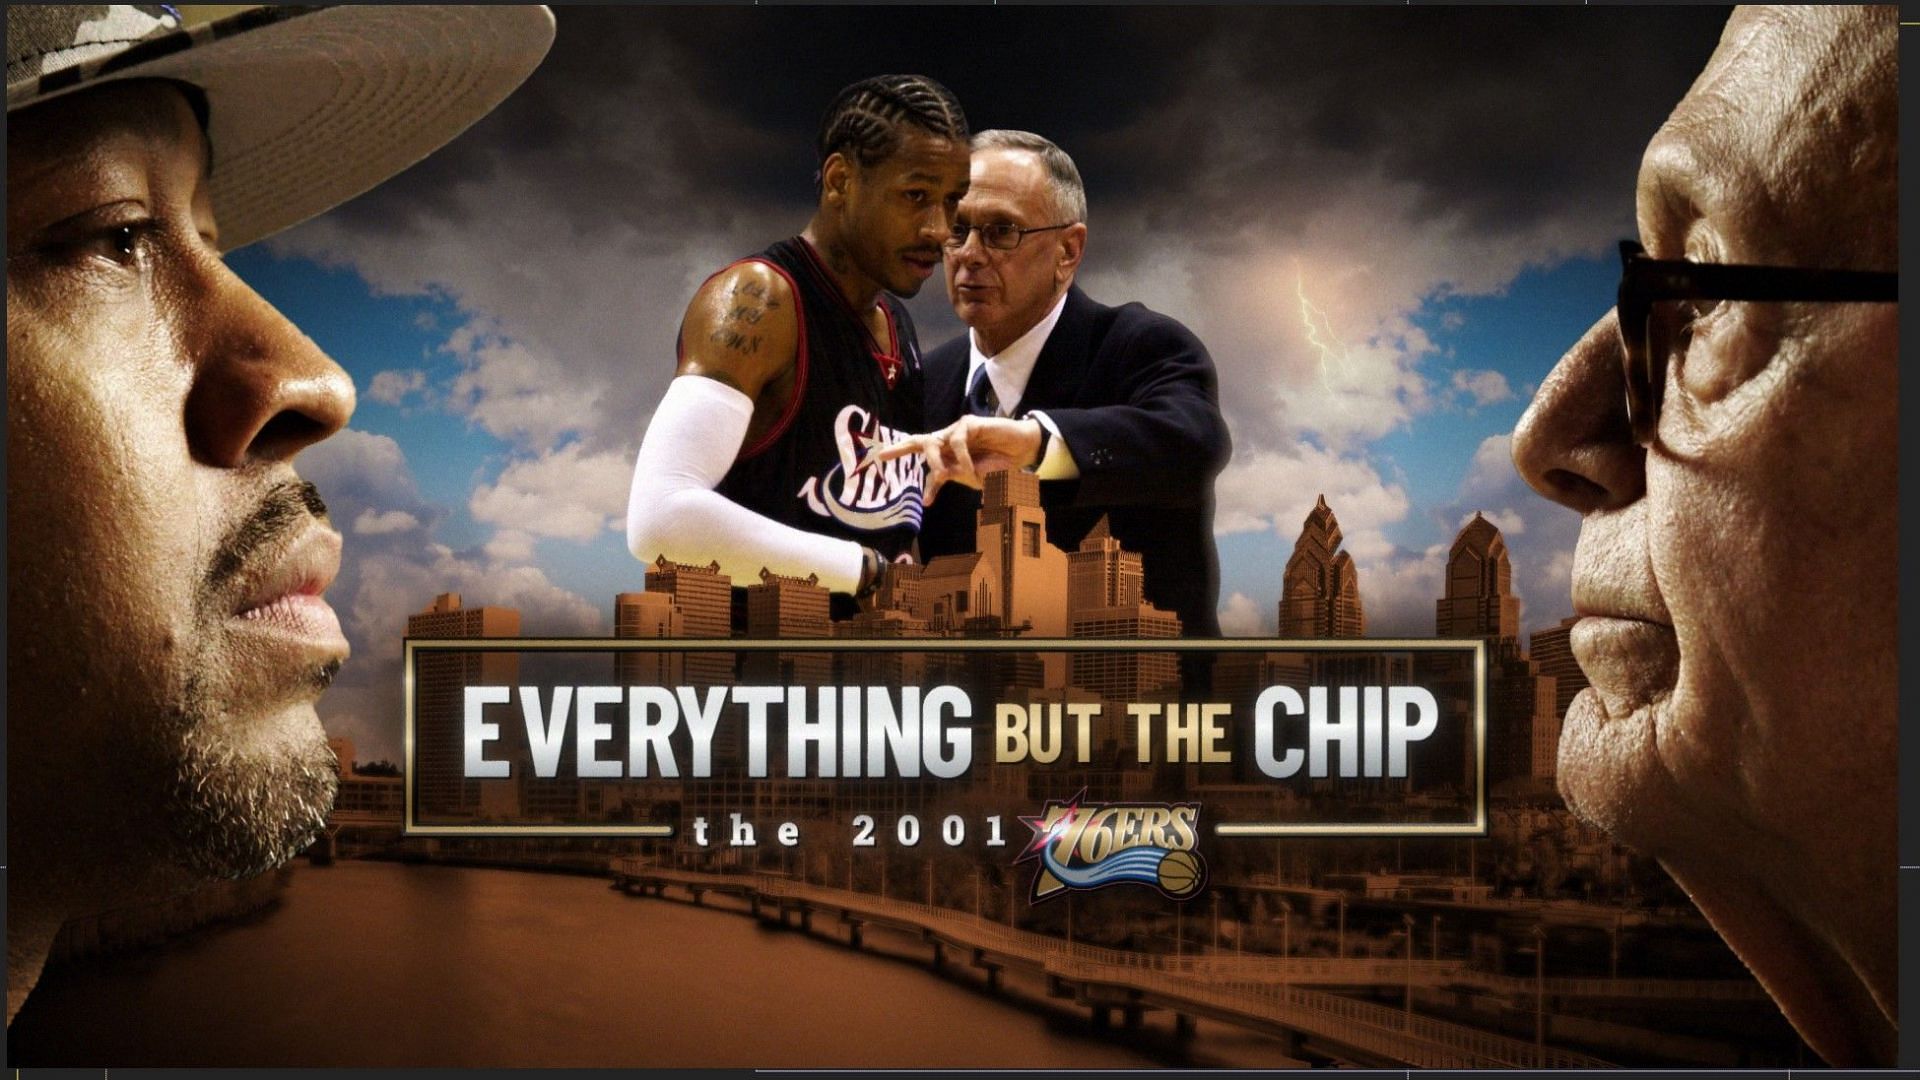 Promo for Philadelphia 76ers legend Allen Iverson&rsquo;s new documentary &ldquo;Everything But the Chip: the 2001 76ers&rdquo;